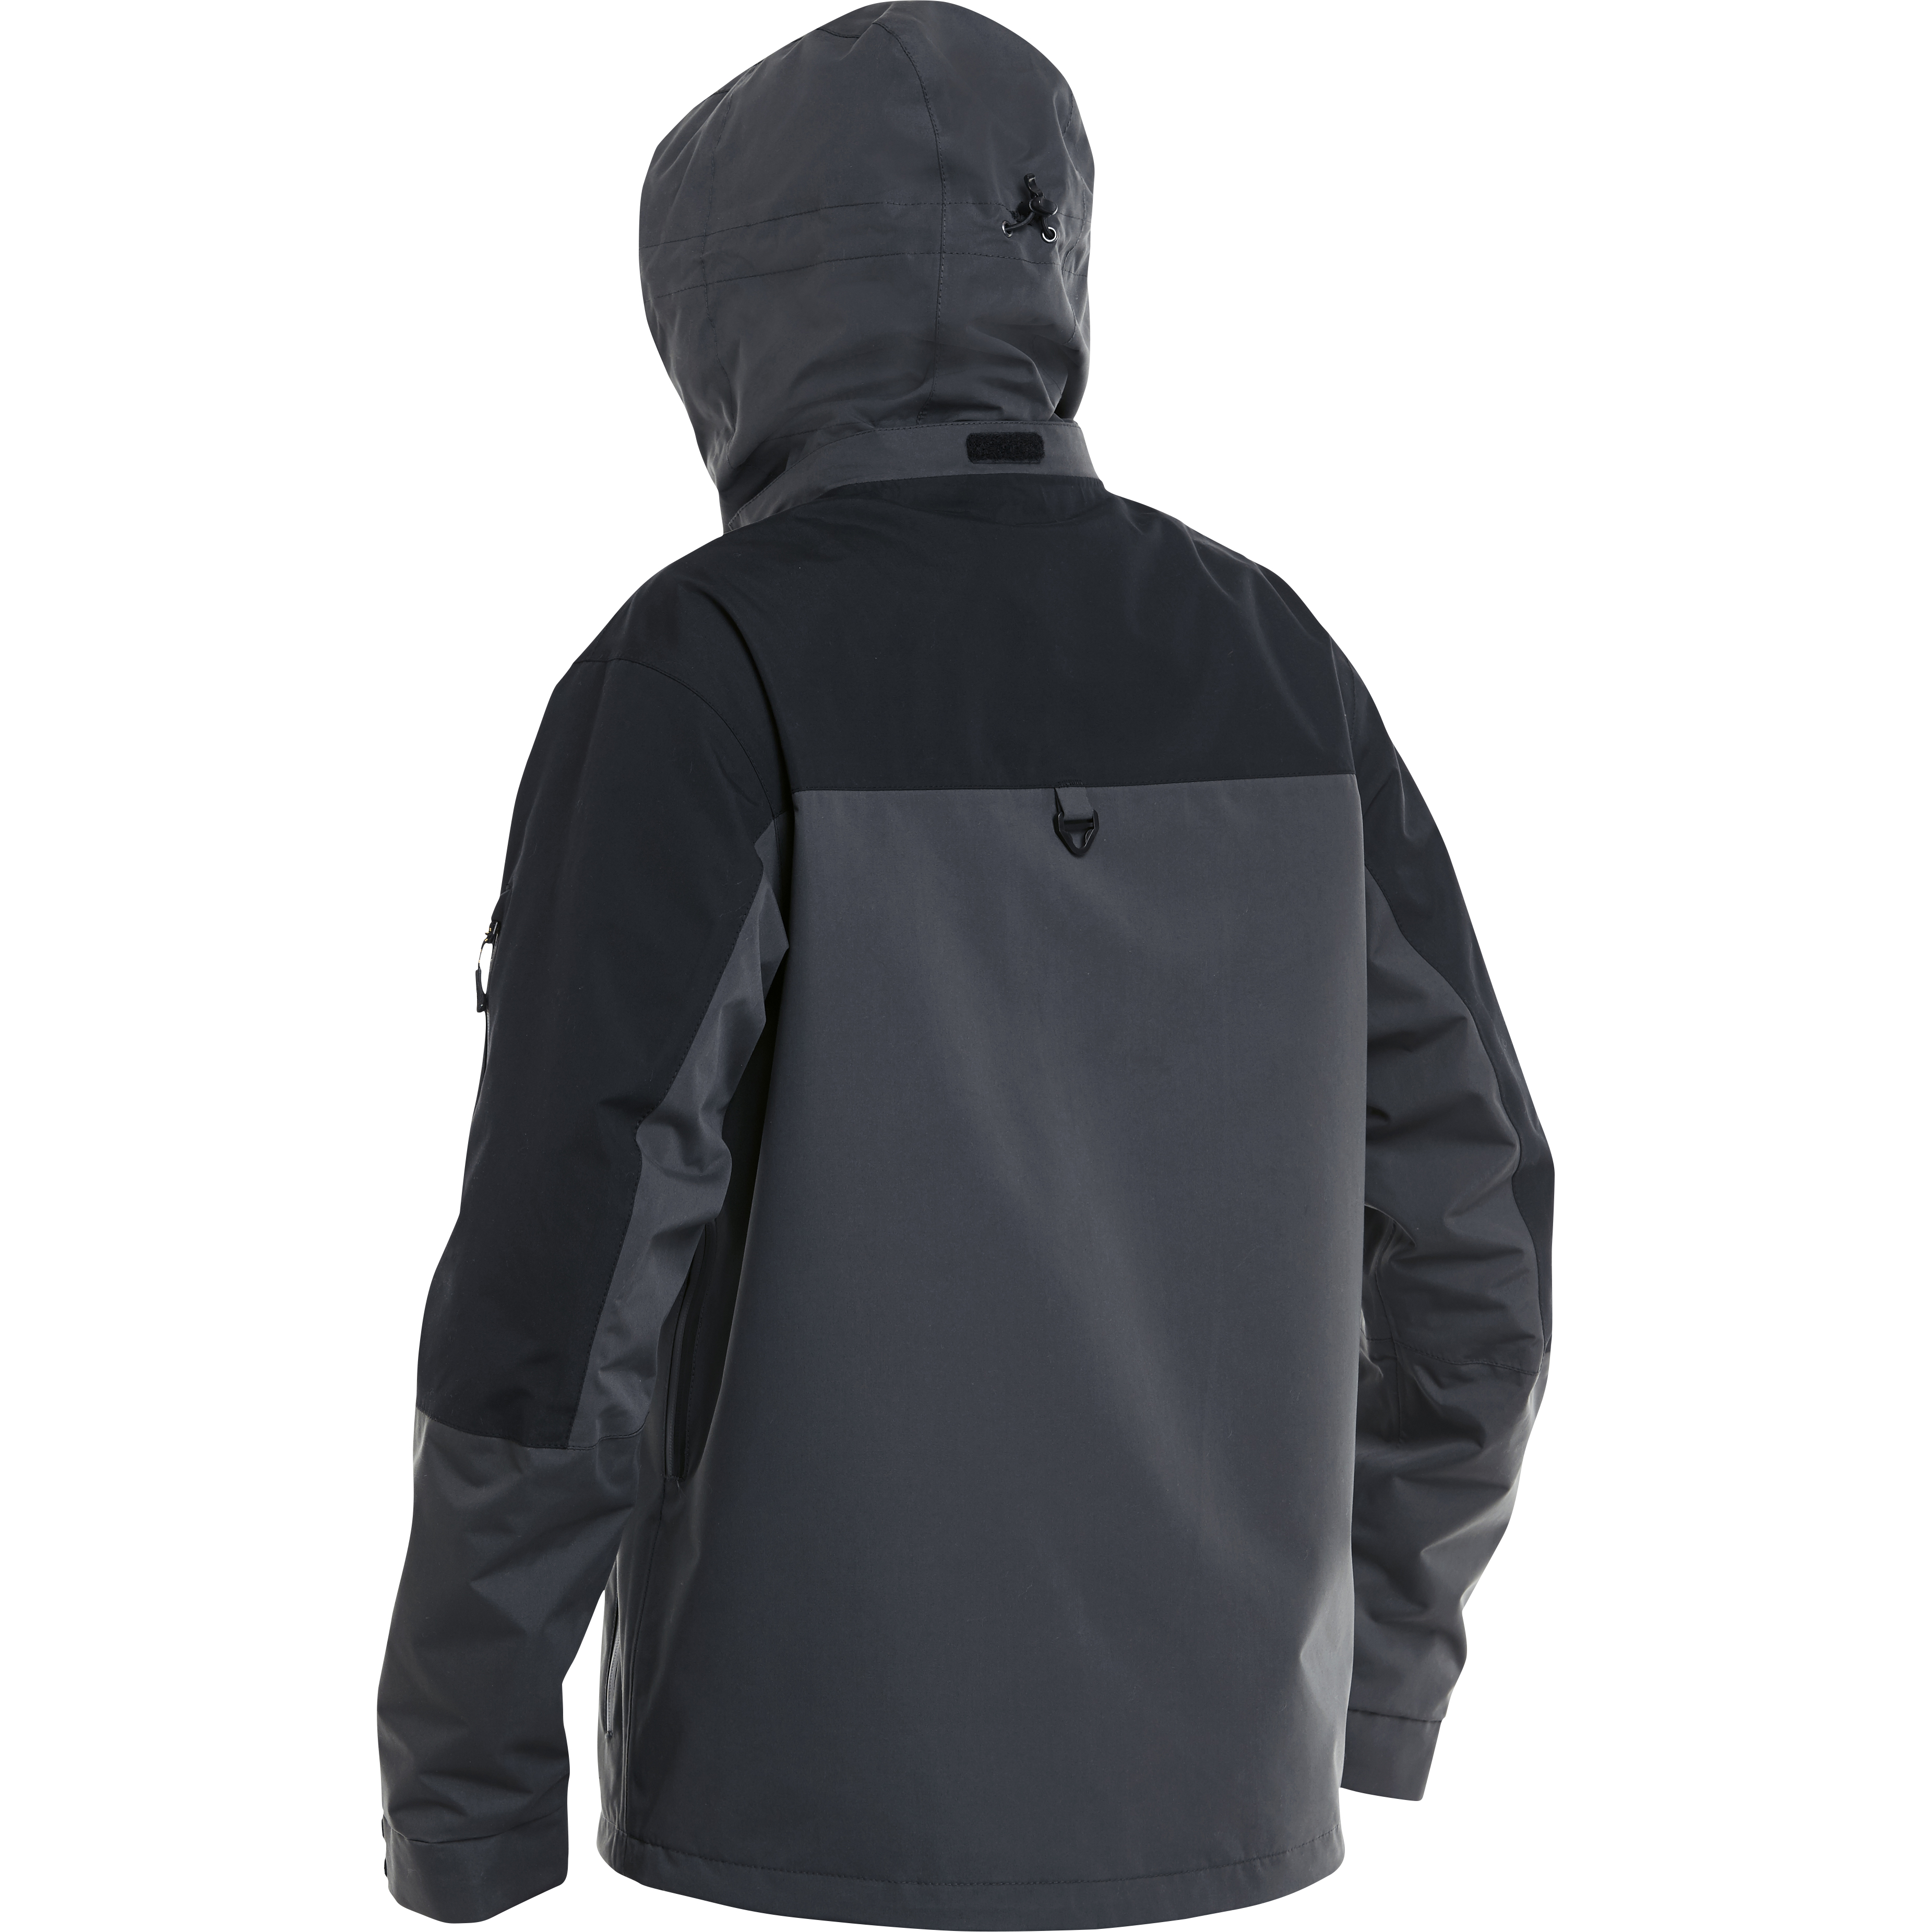 Rear product image of the Fladen jacket